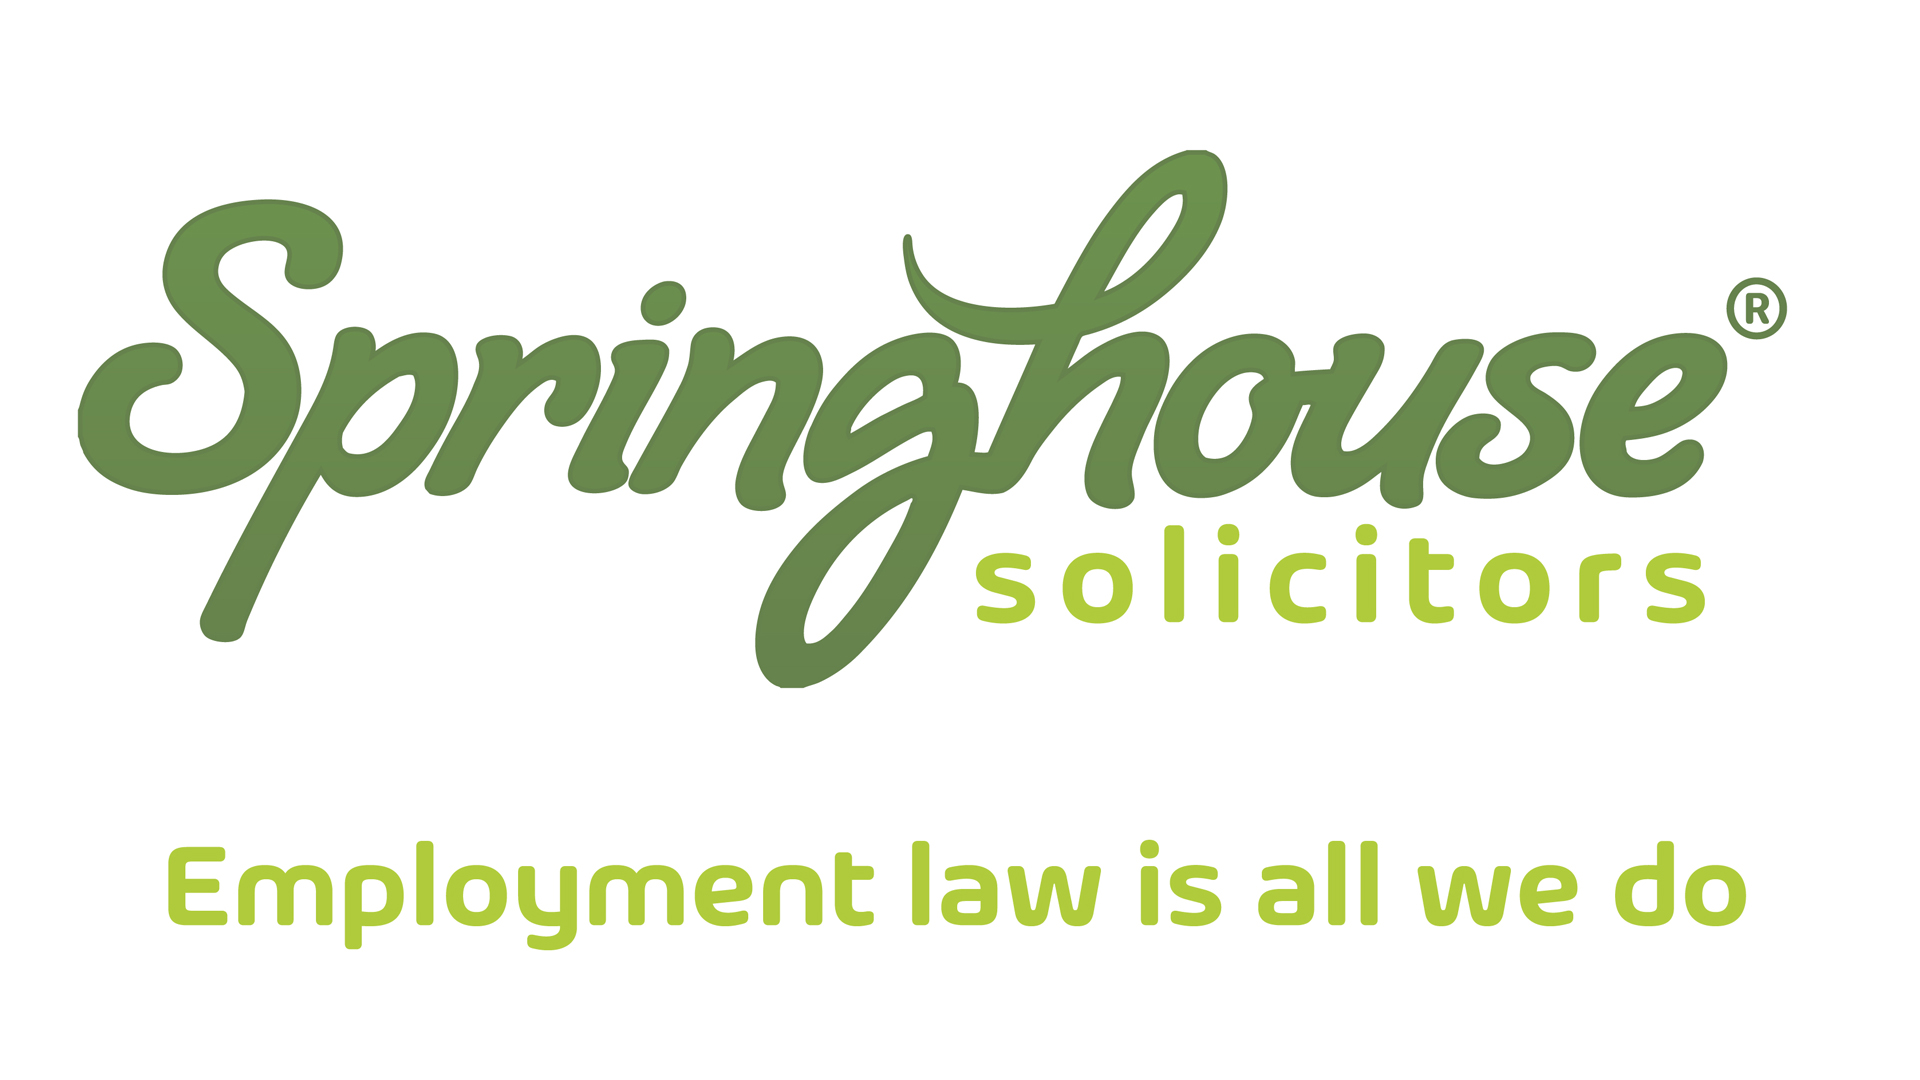 Springhouse Solicitors